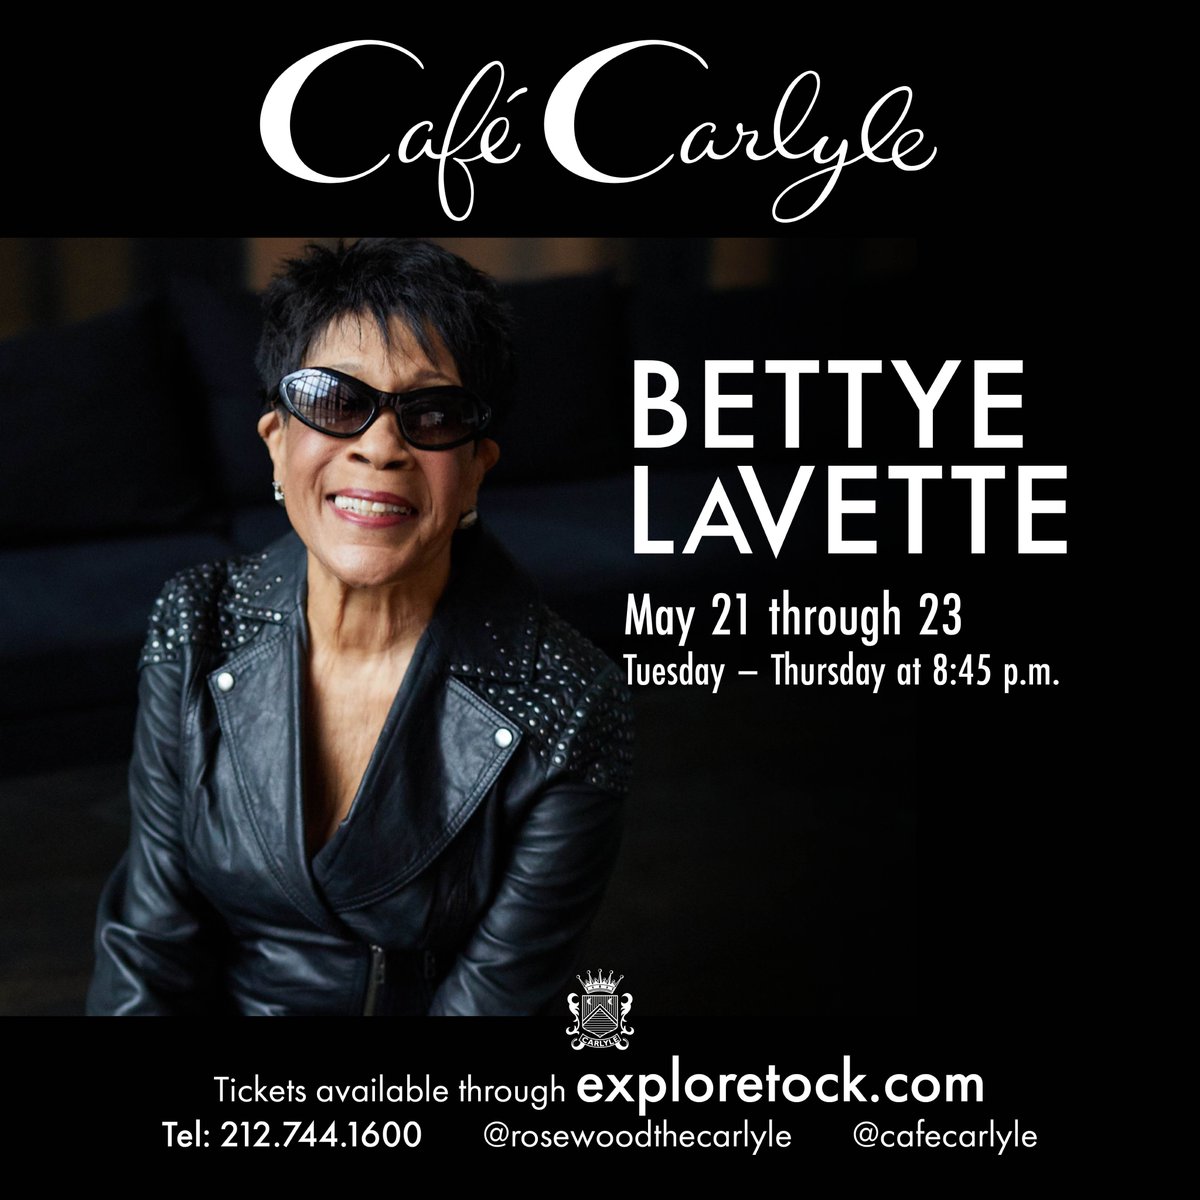 I'll be back at The Cafe Carlyle with keyboard player Alan Hill in a few weeks. Alan was my music director for many years. We will be doing songs from throughout my 62 year career.